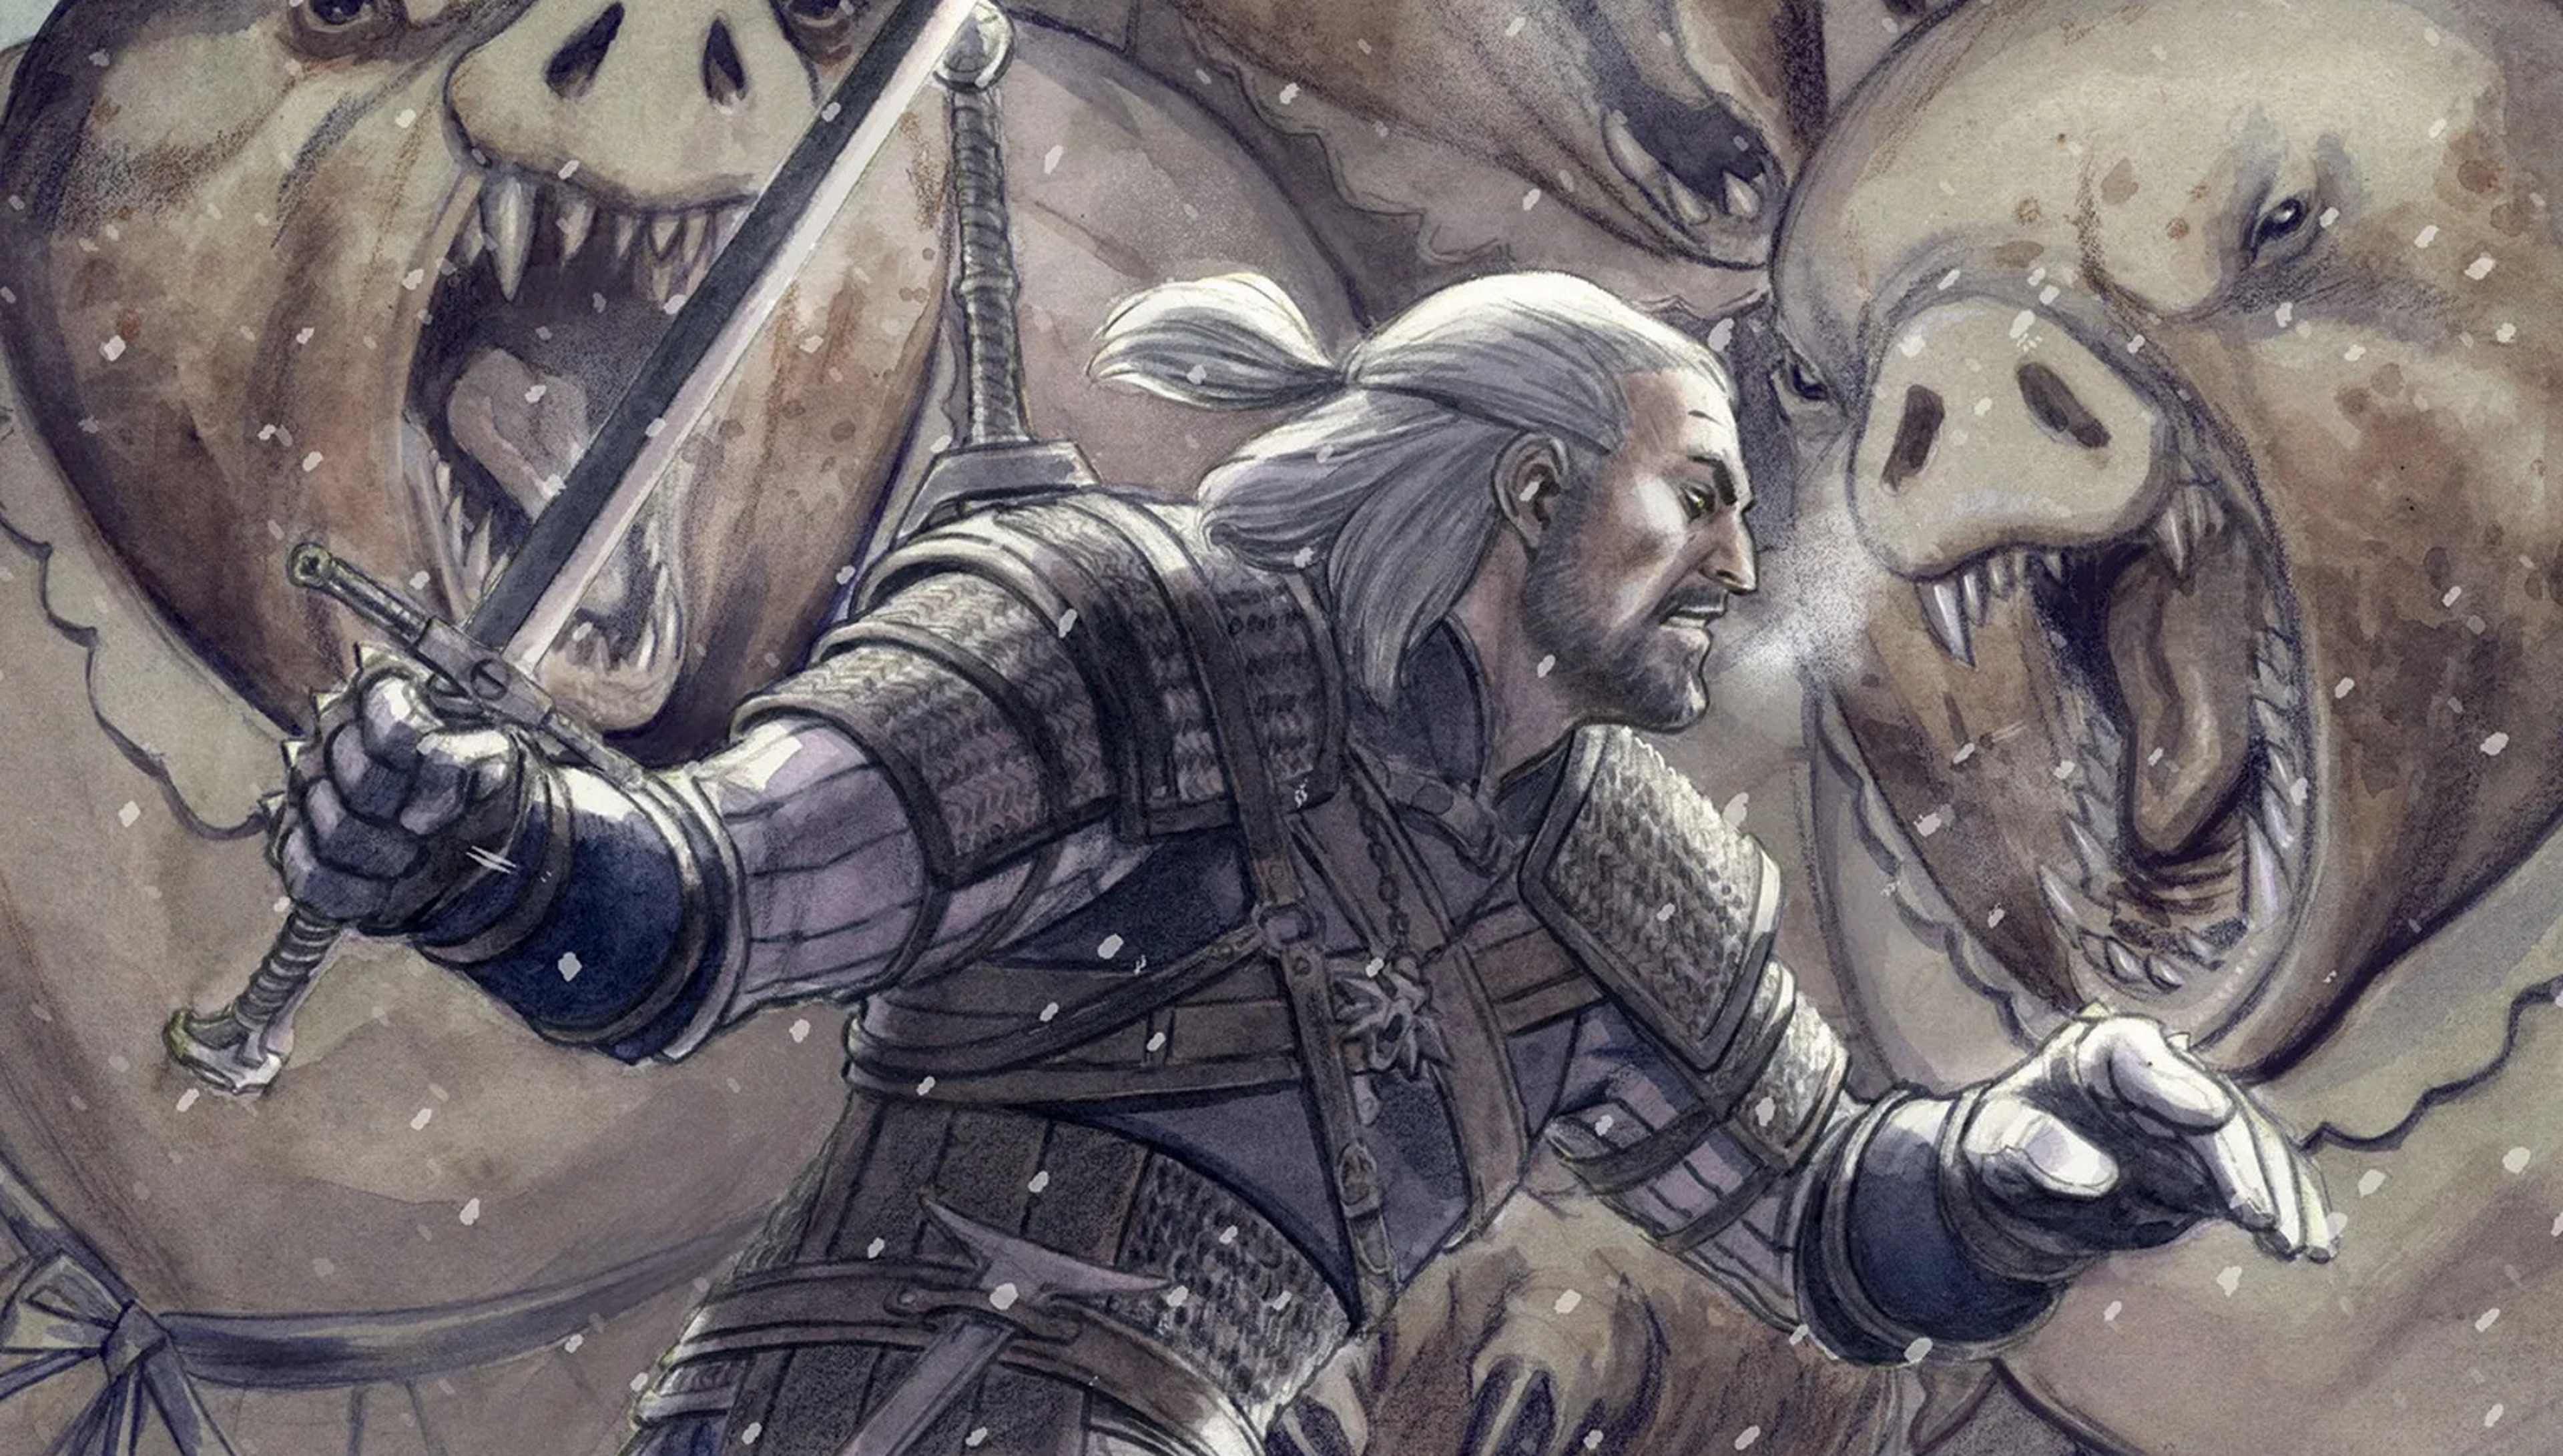 Geralt takes on the Three Little Pigs in a new Witcher comic series